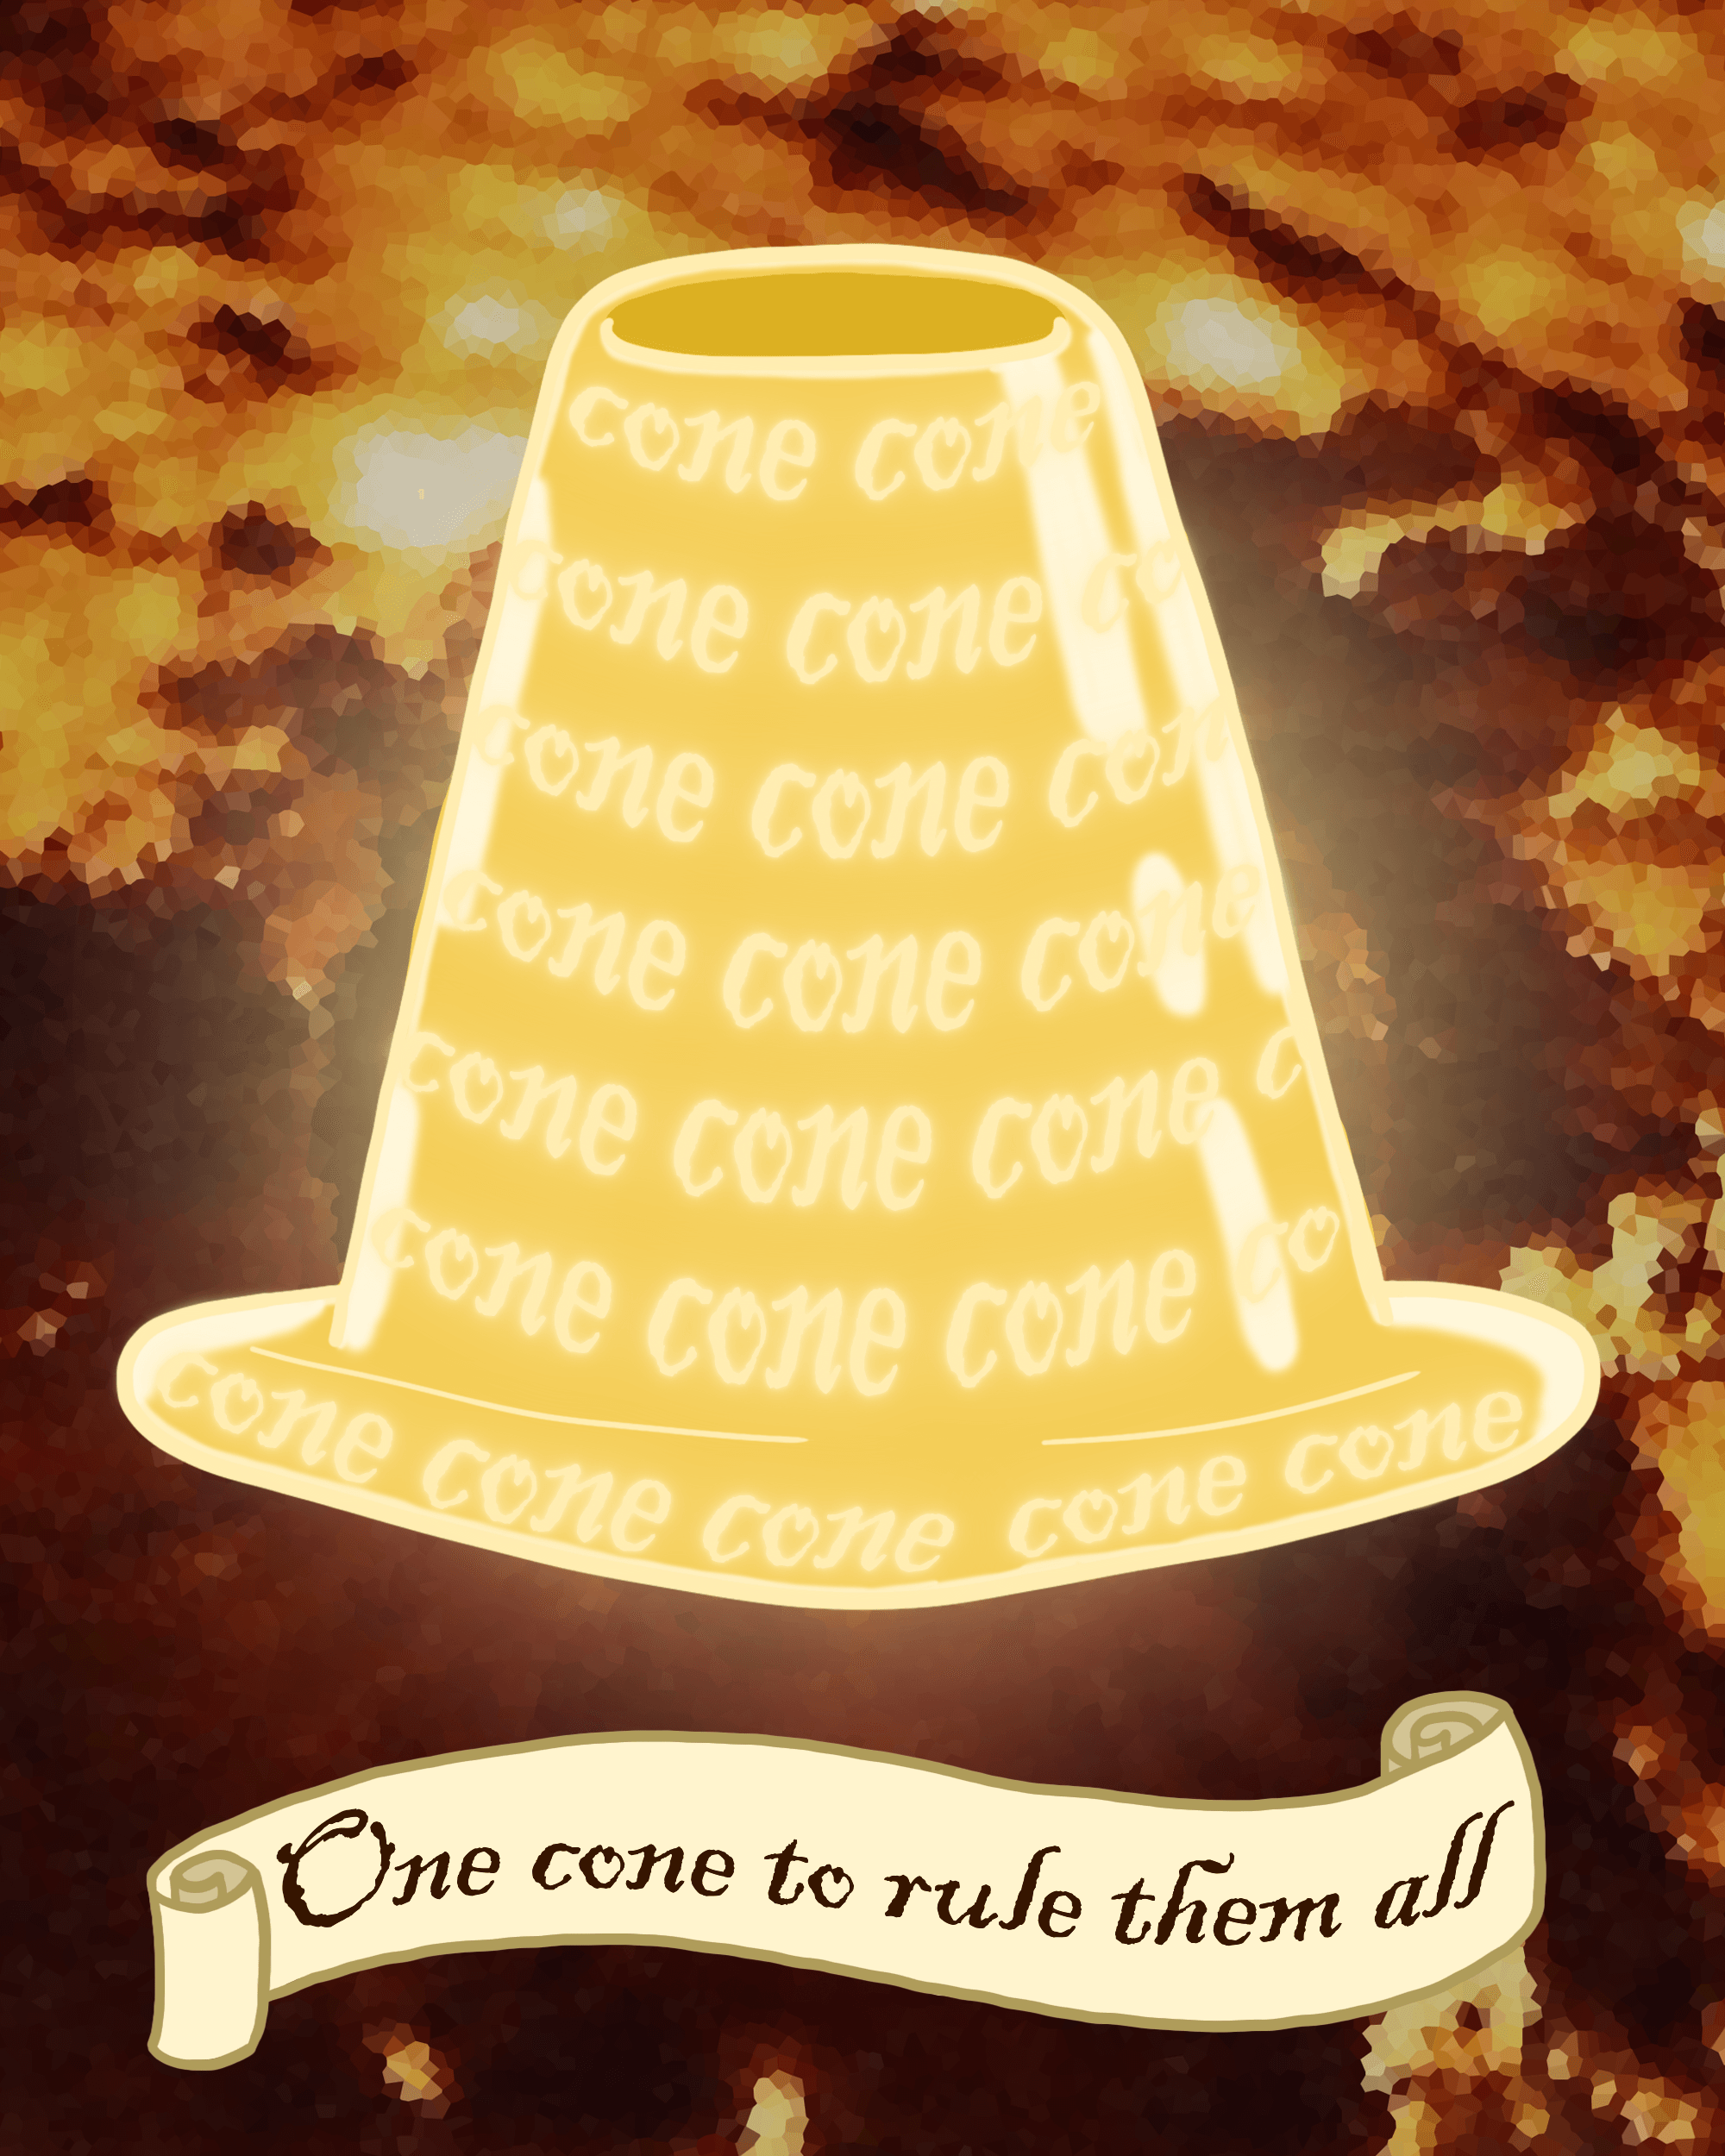 Lord of the Cones